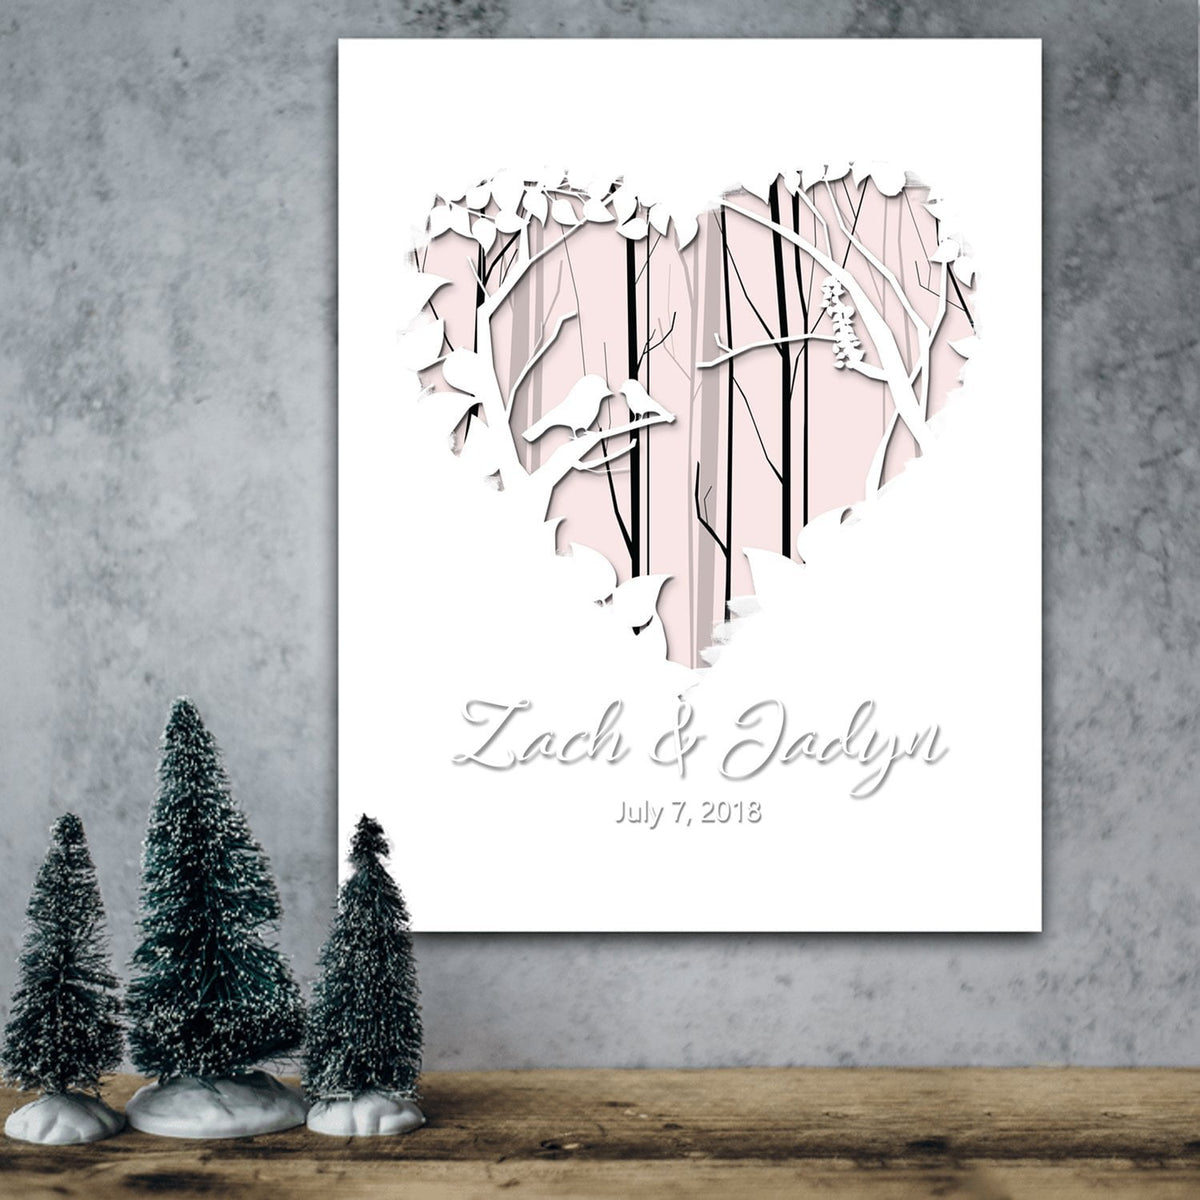 Romantic Personalized Art - Your names and date in the art 